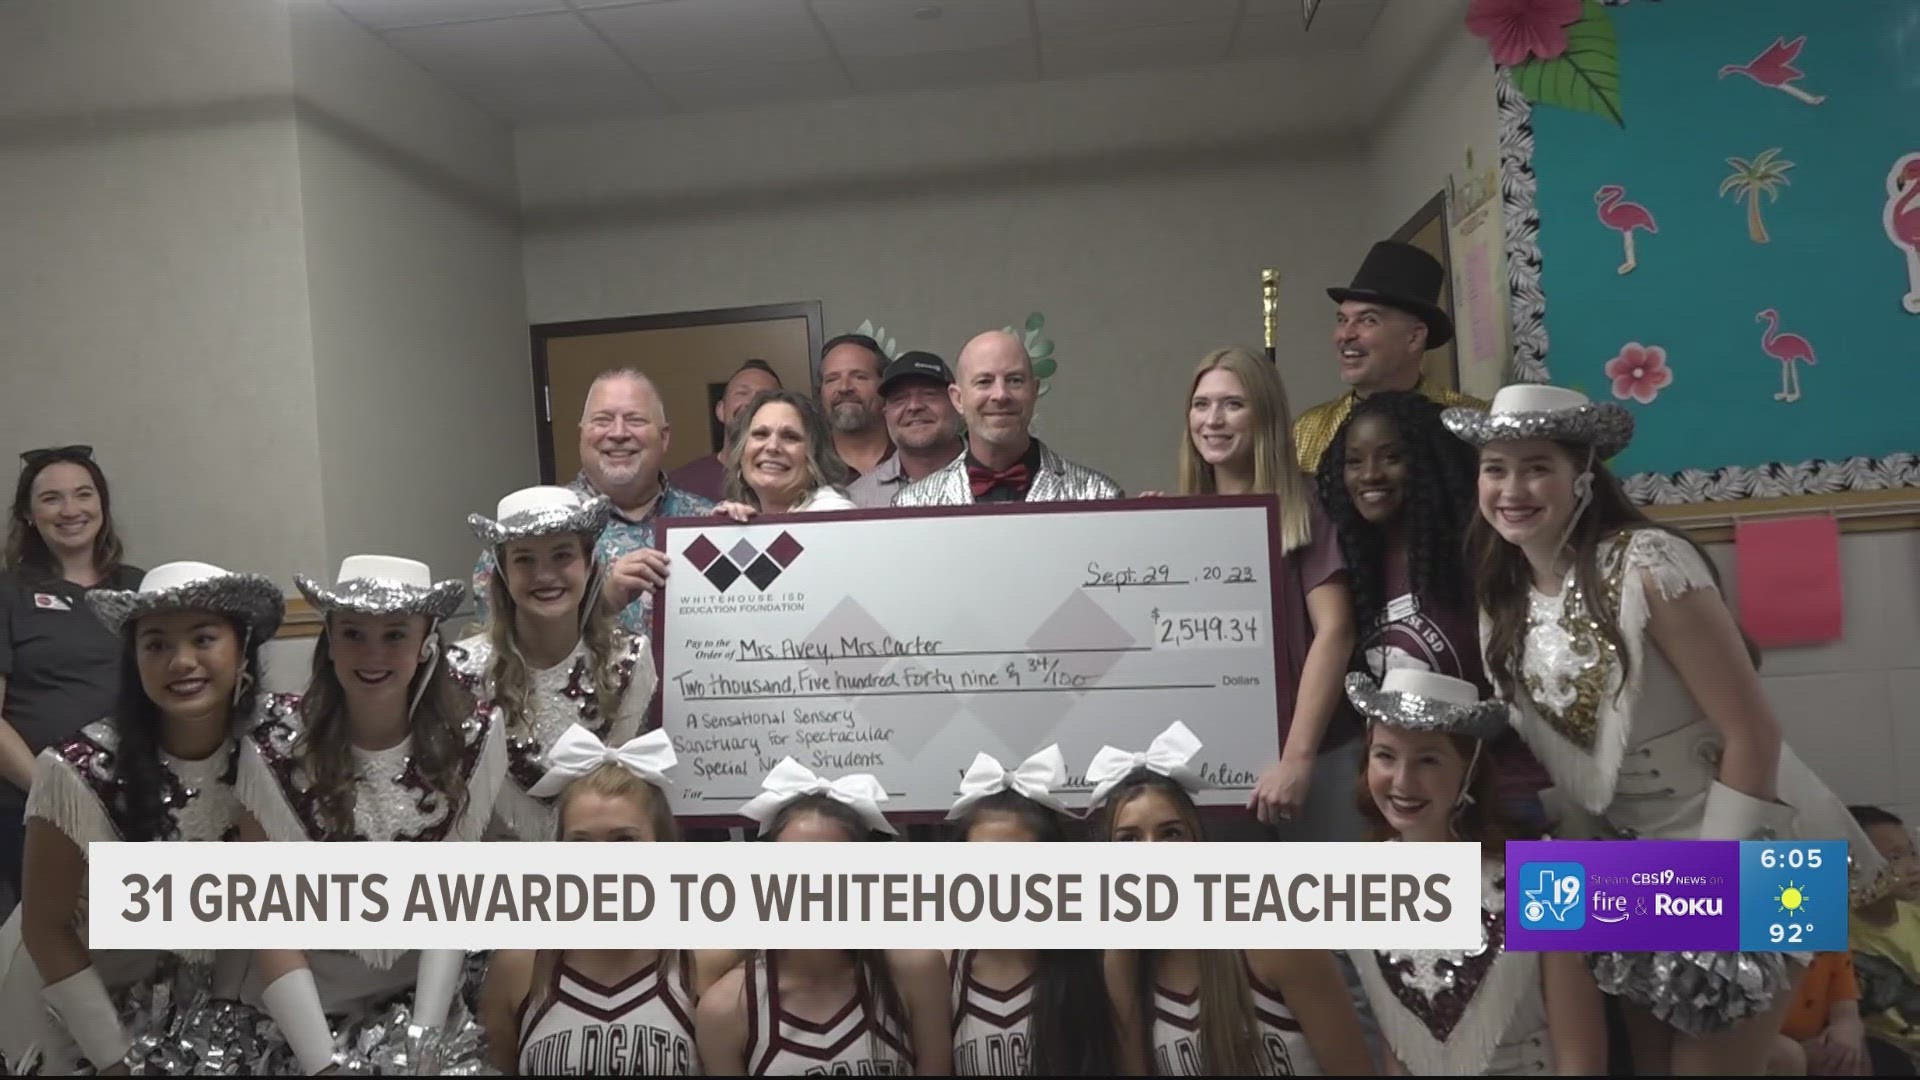 The Whitehouse ISD Education Foundation received over $74,000 in grants for teachers within the district.